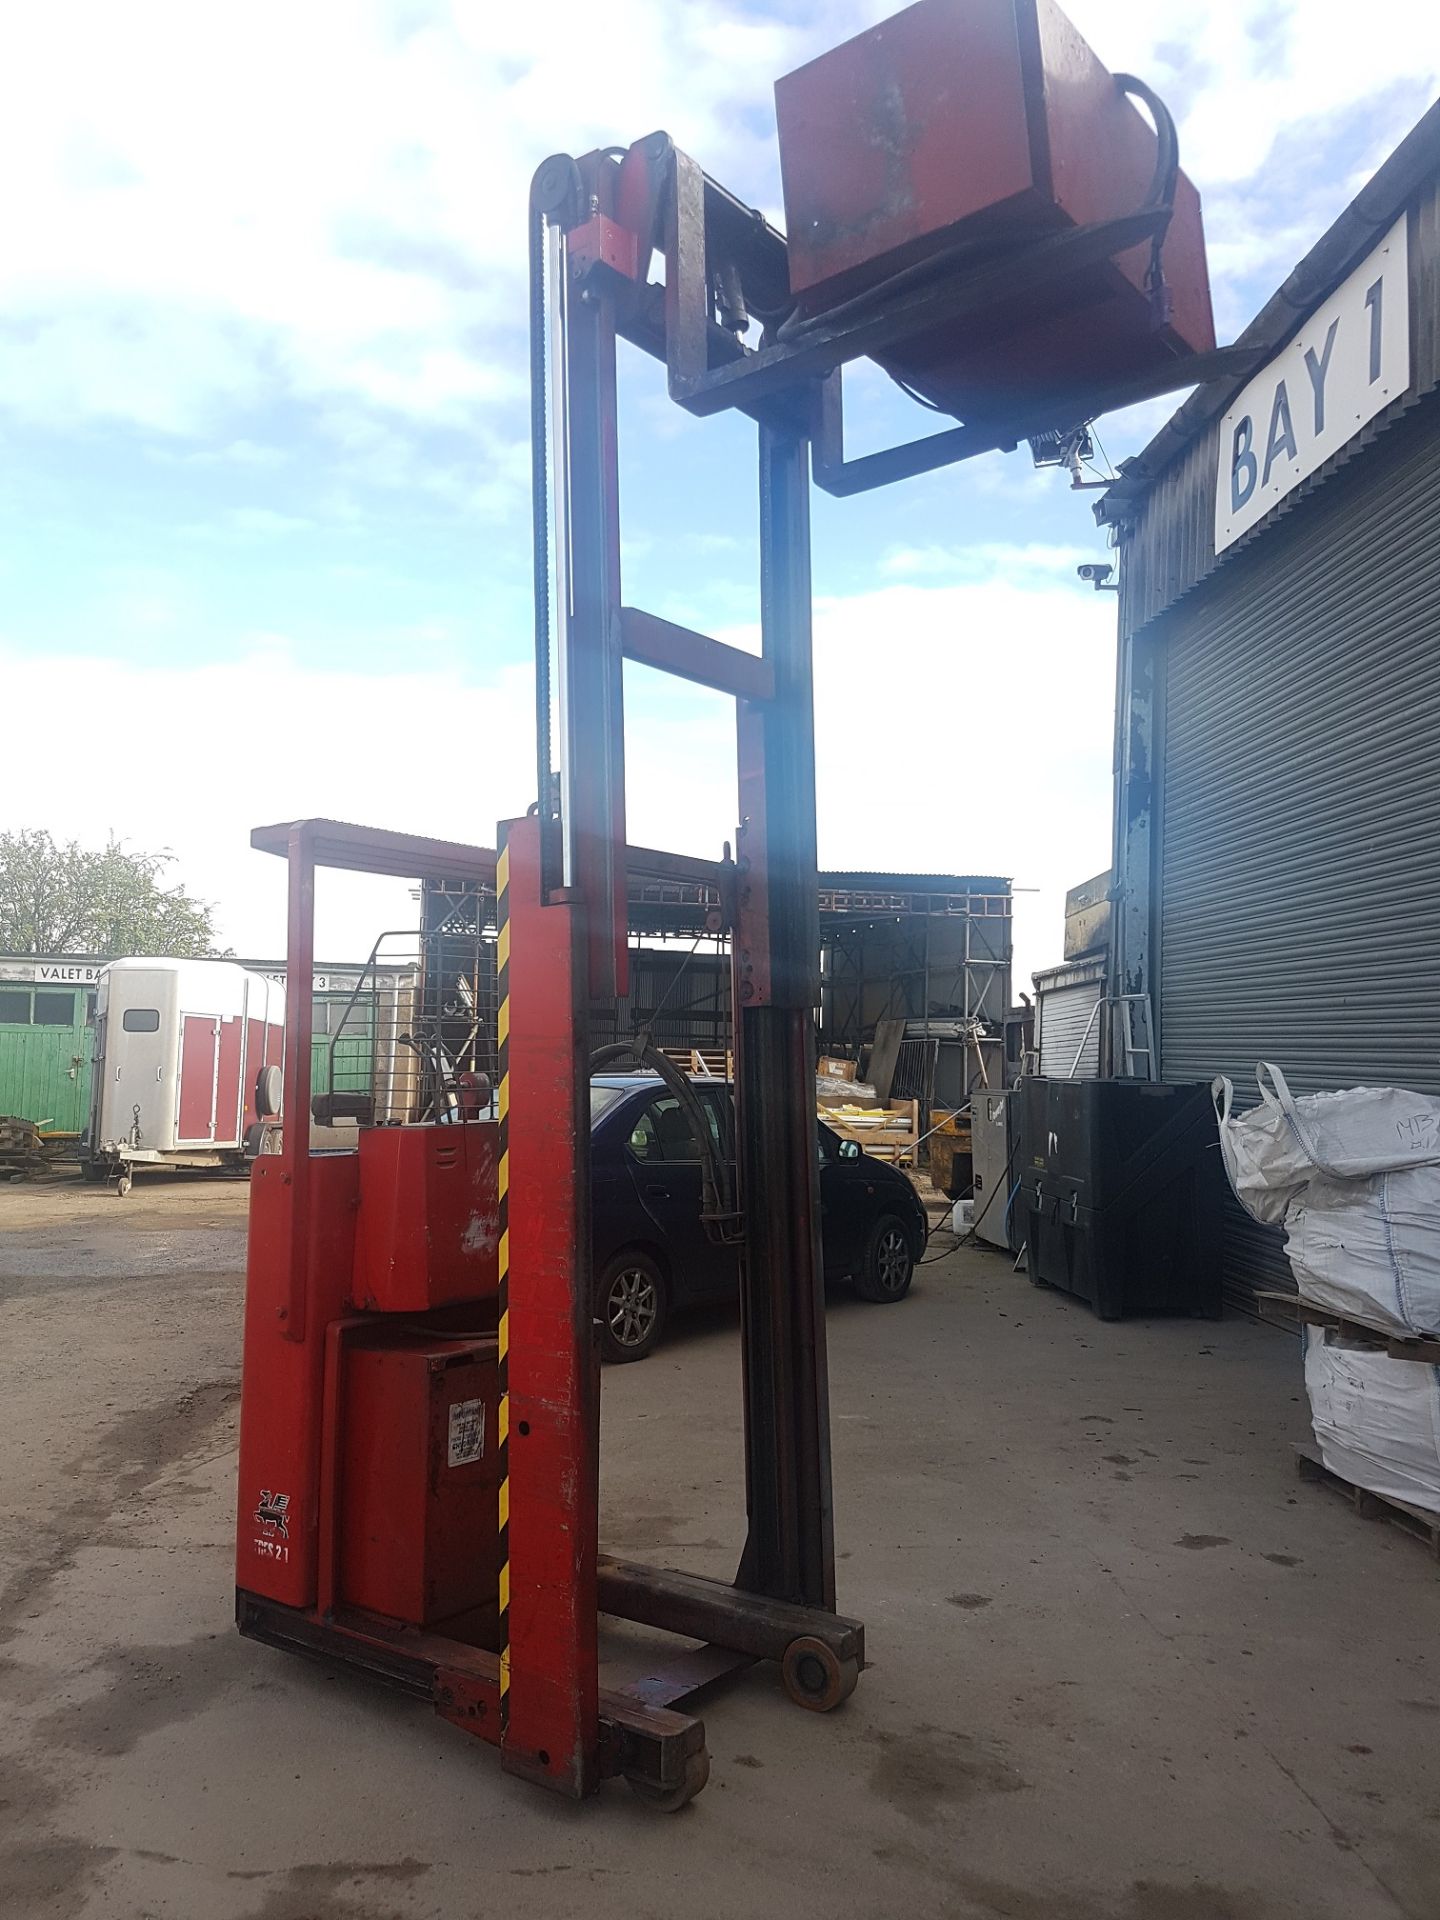 LANSING BAGNALL FRES 21 ELECTRIC FORKLIFT, GOOD BATTERY *PLUS VAT*   BATTERY CHARGER INCLUDED - Image 16 of 19